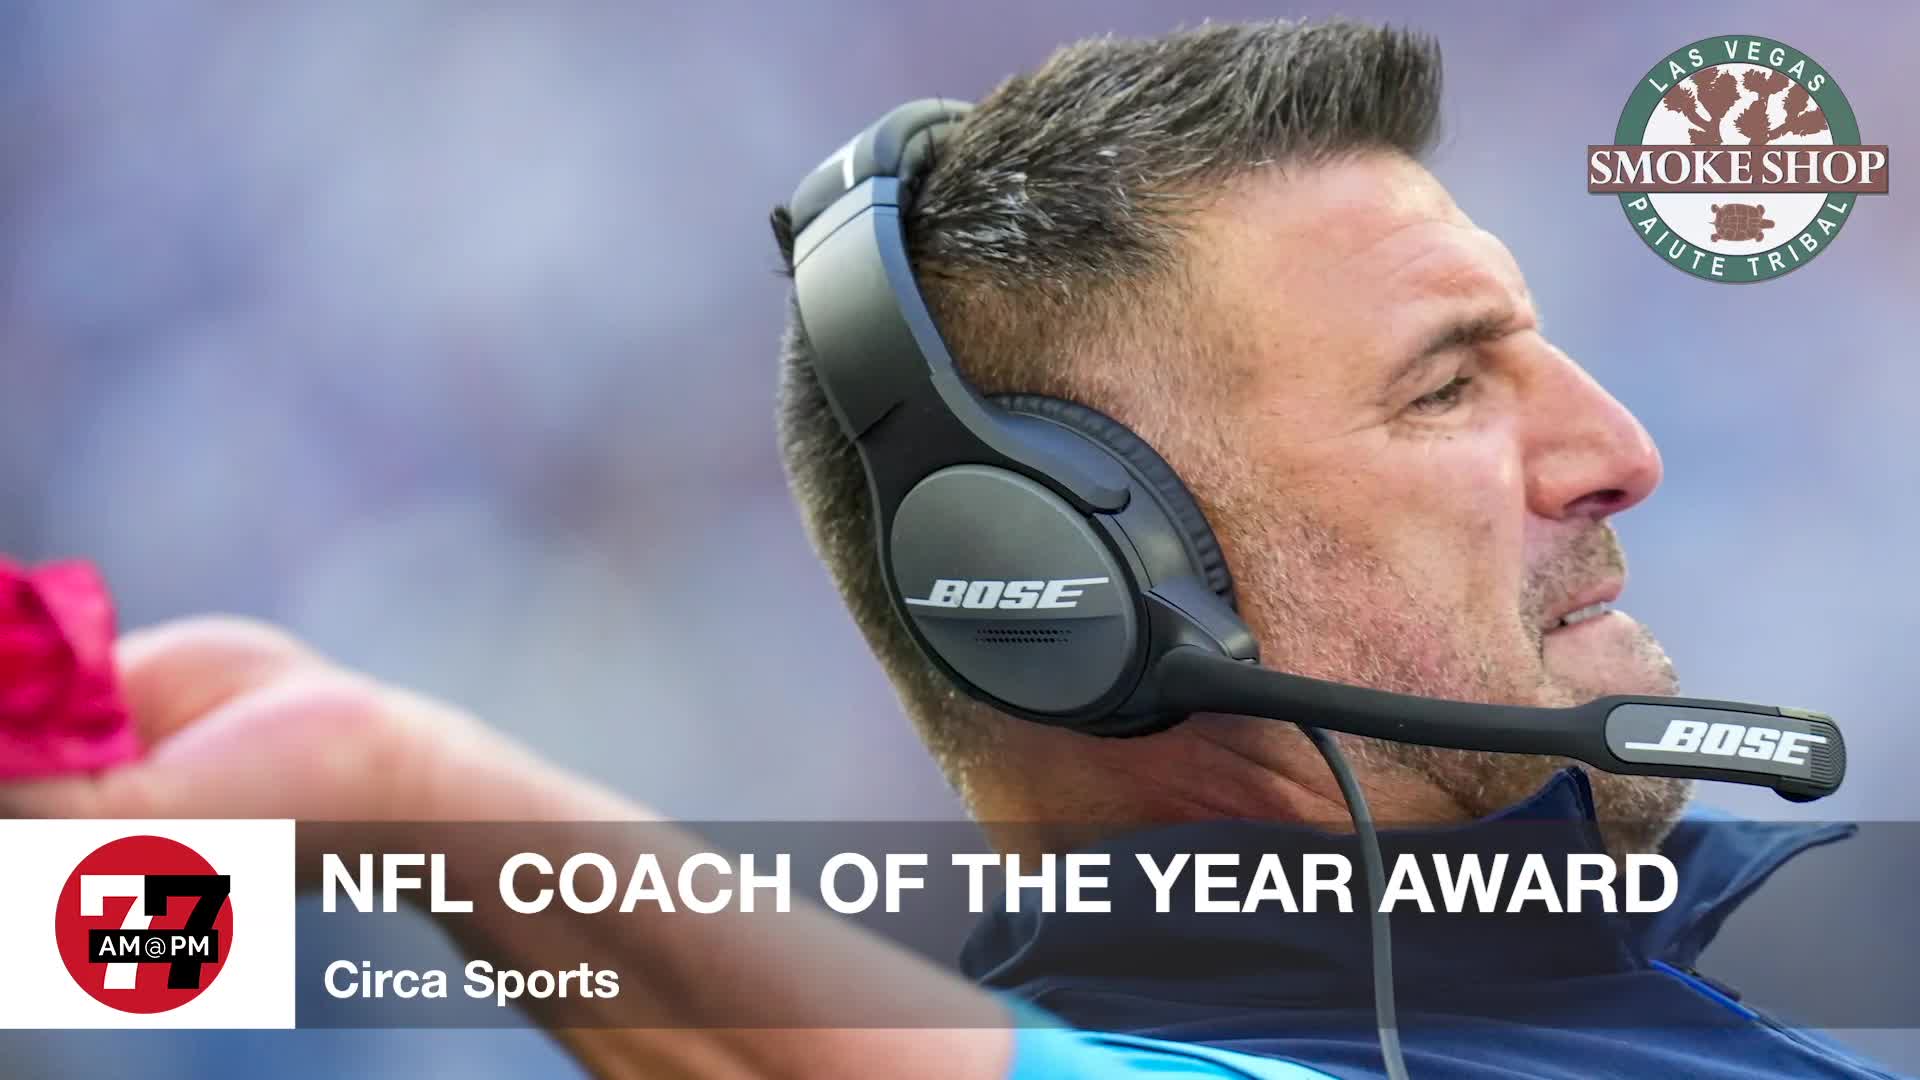 7@7PM NFL Coach of the Year Award